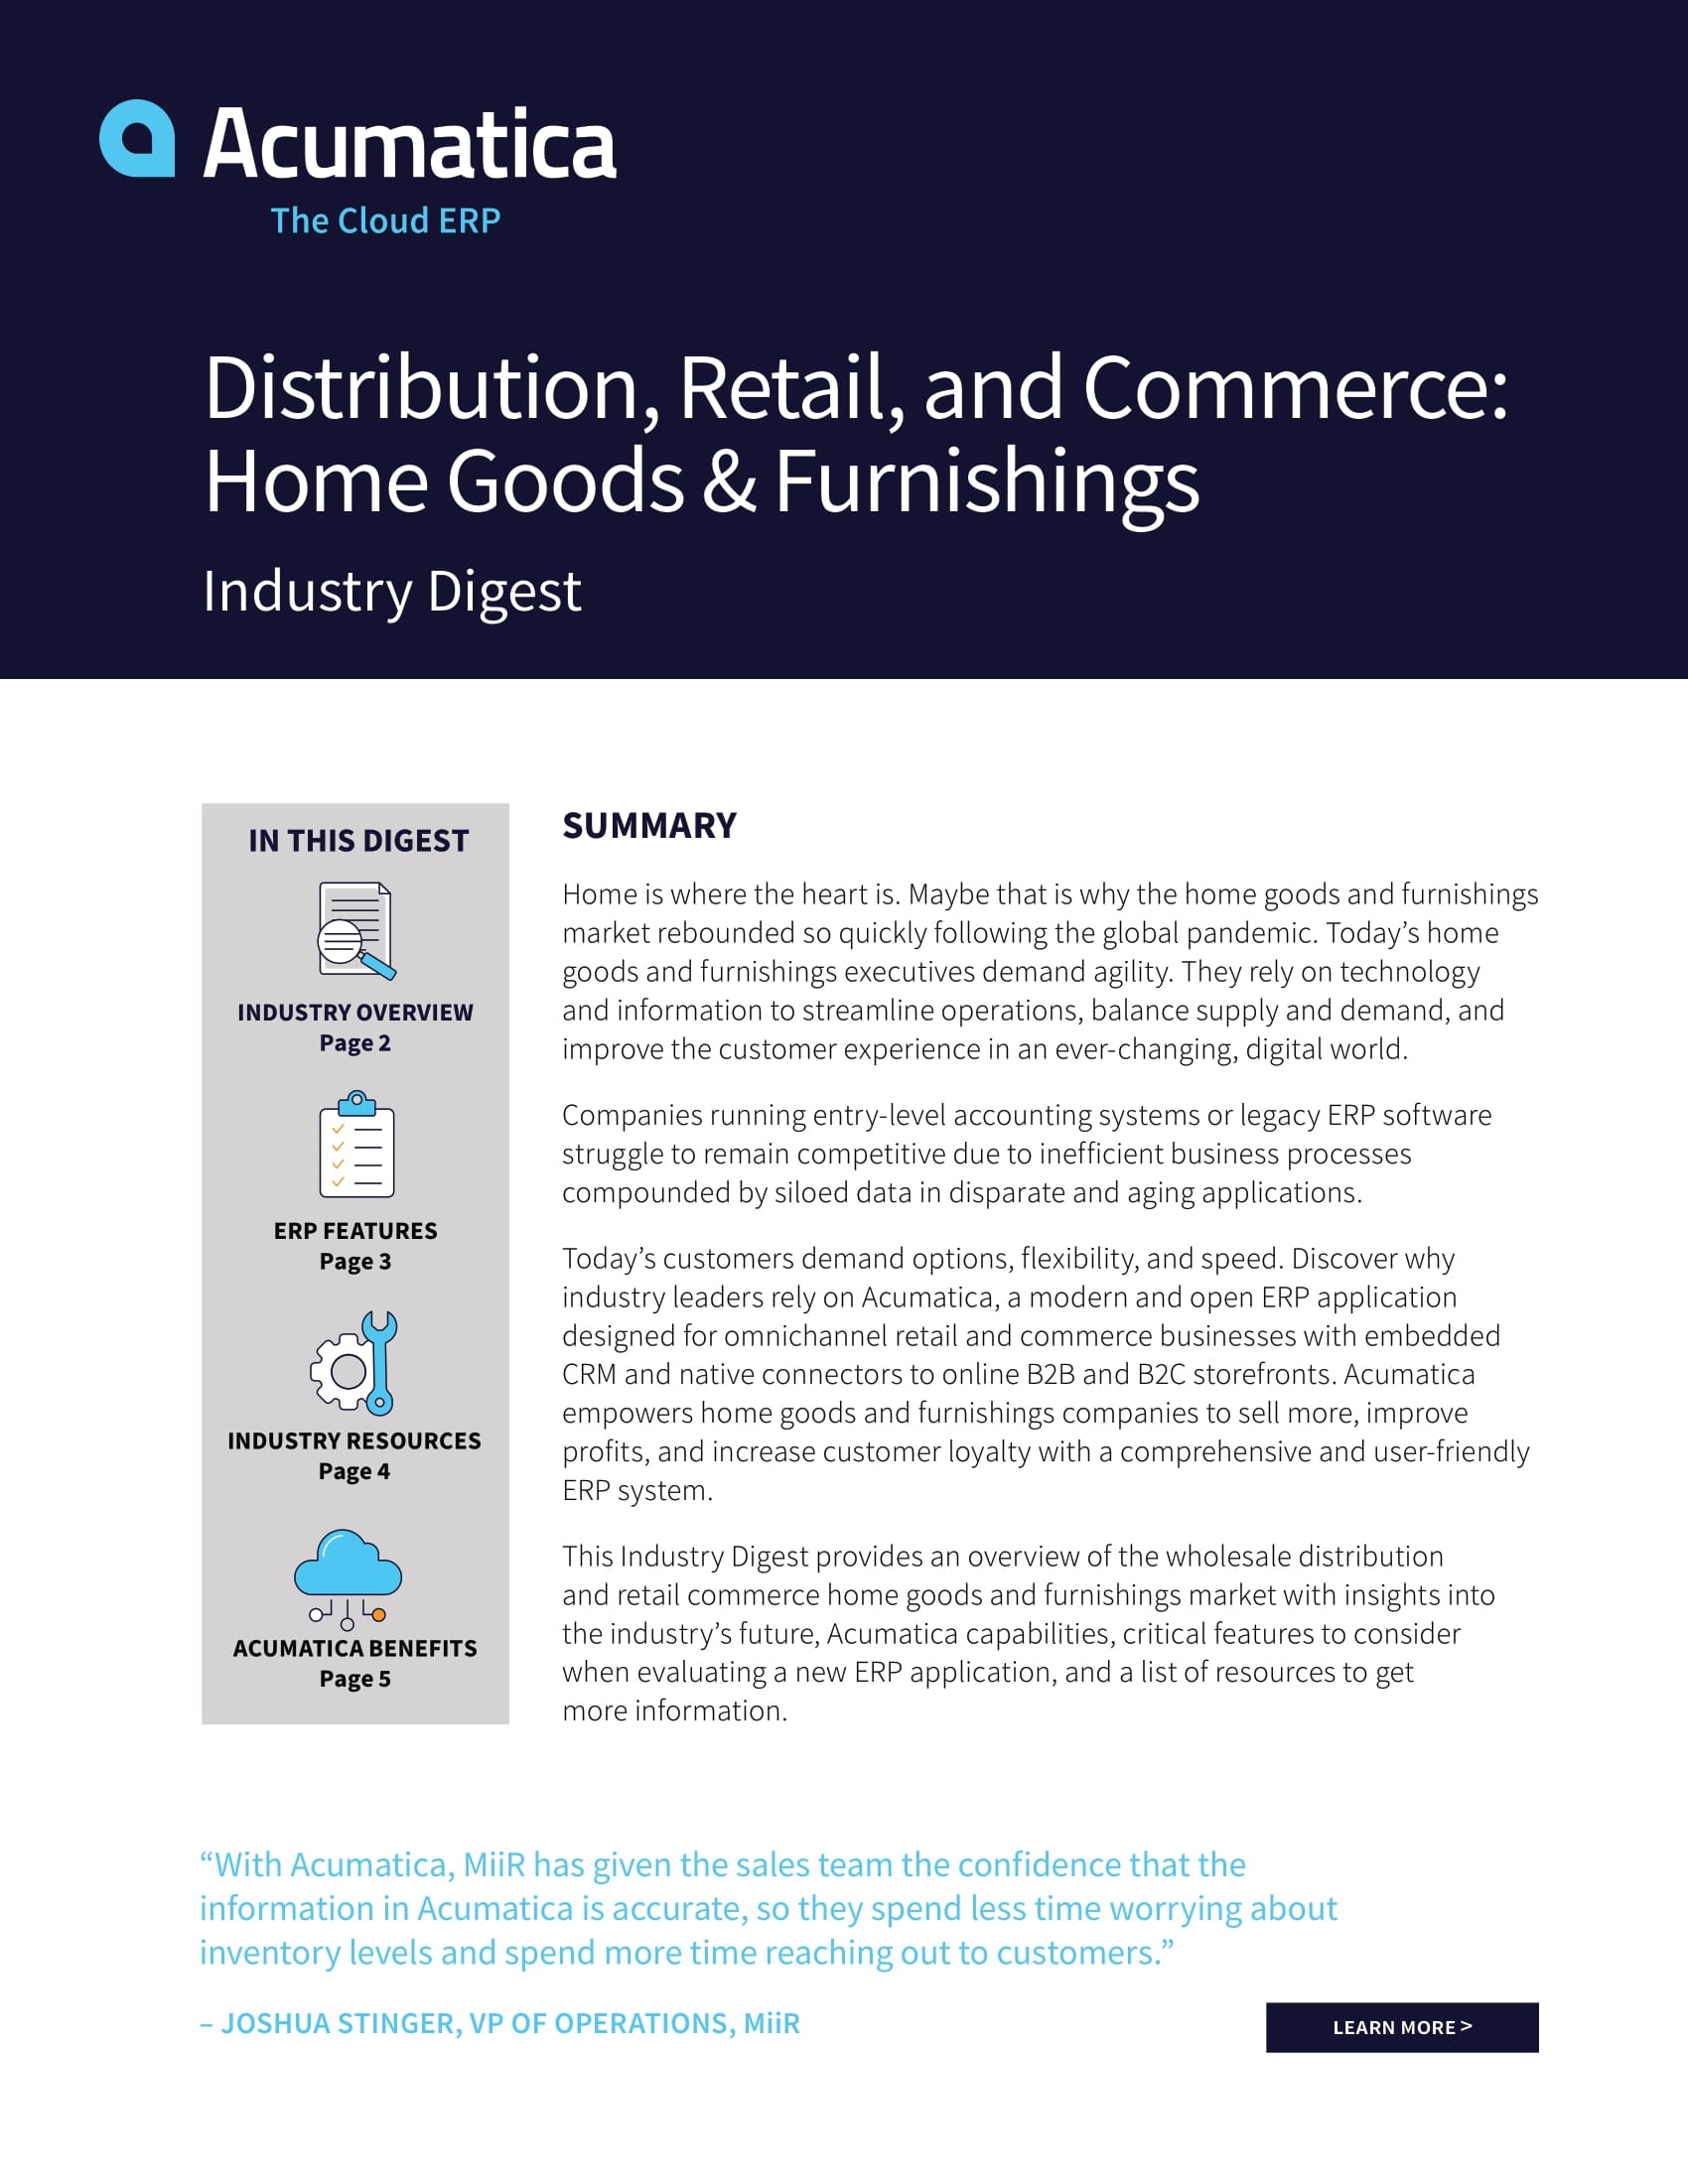 Home Goods and Furnishings Companies Empowered With Cloud ERP Applications